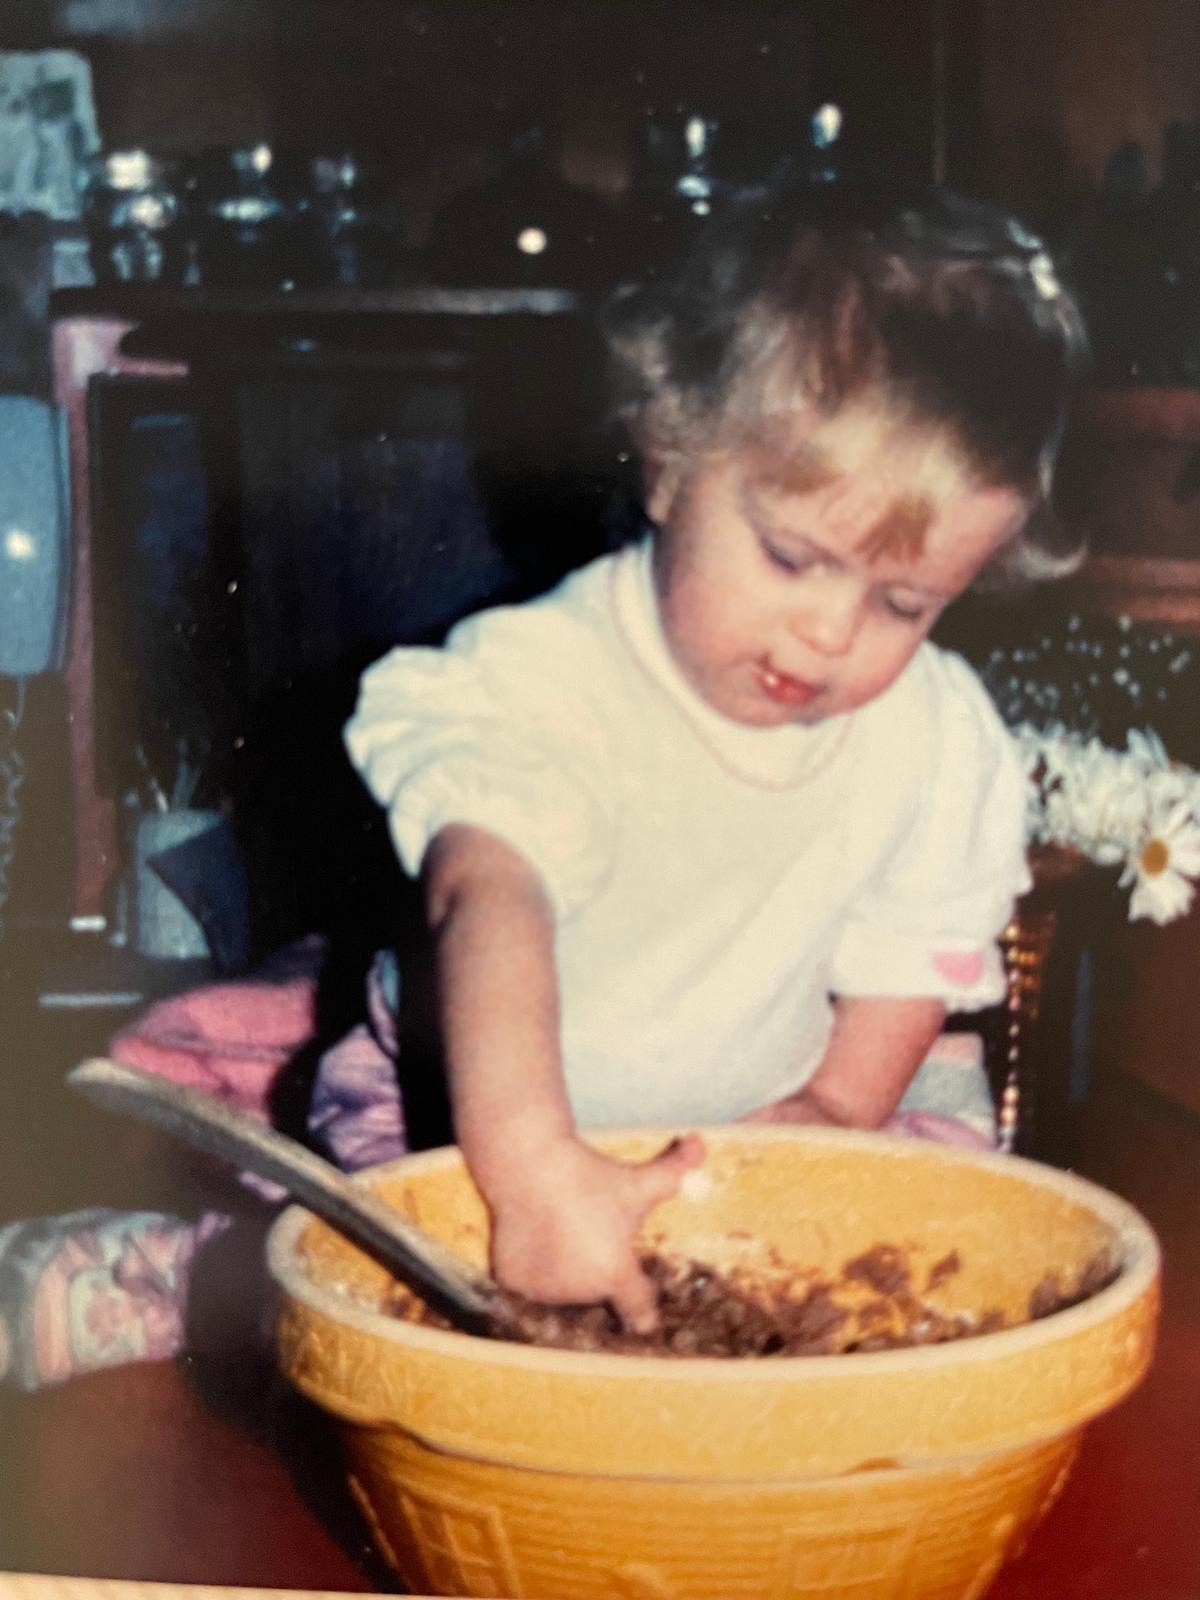 The author at her grandma's house circa 1985, doing what she did best: sampling. (Courtesy of Megan Baker)